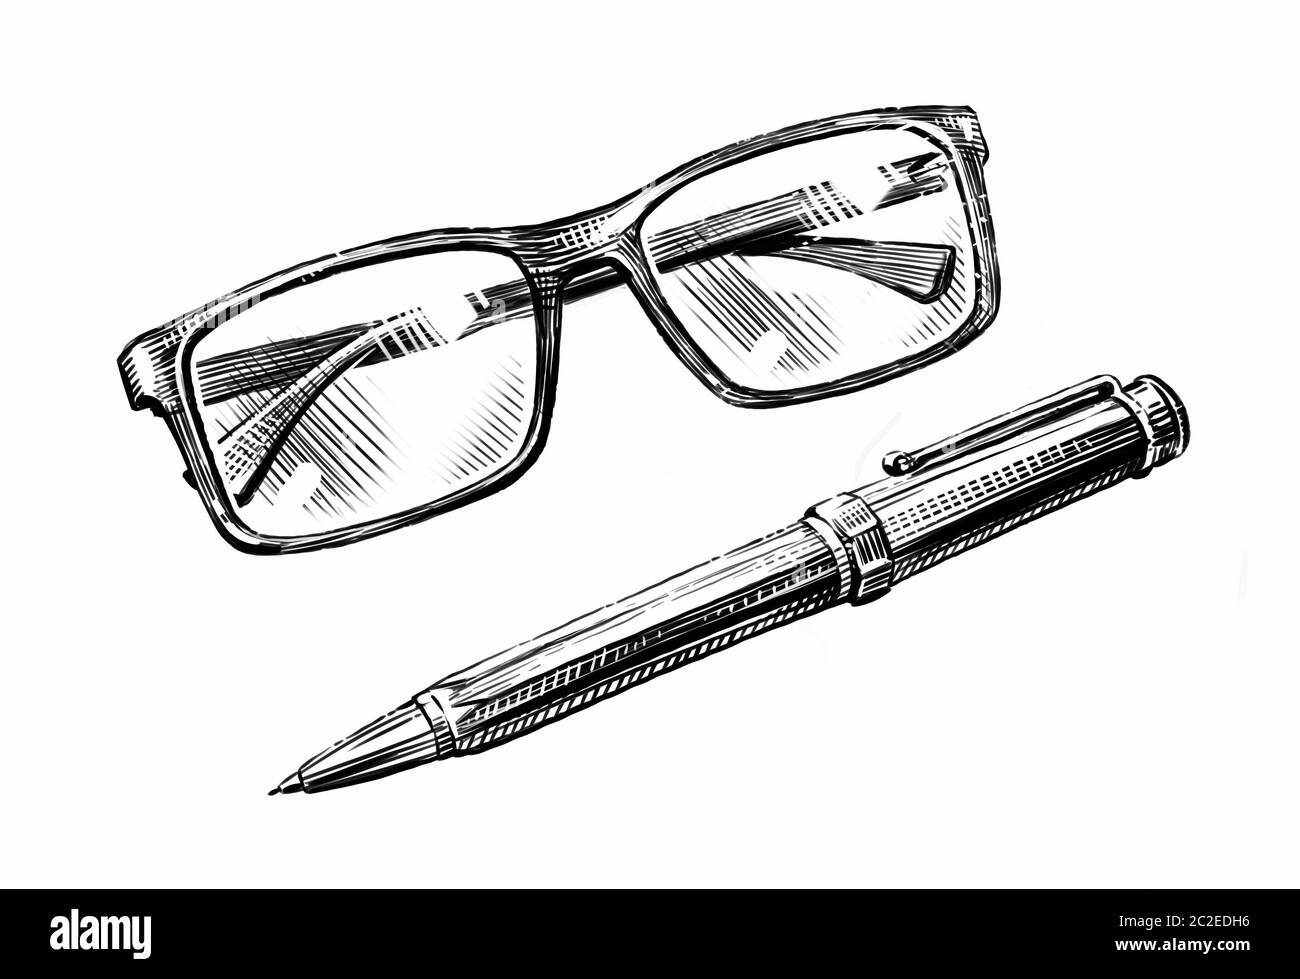 Hand-drawn sketch glasses and pen. Business, education retro vintage illustration Stock Photo